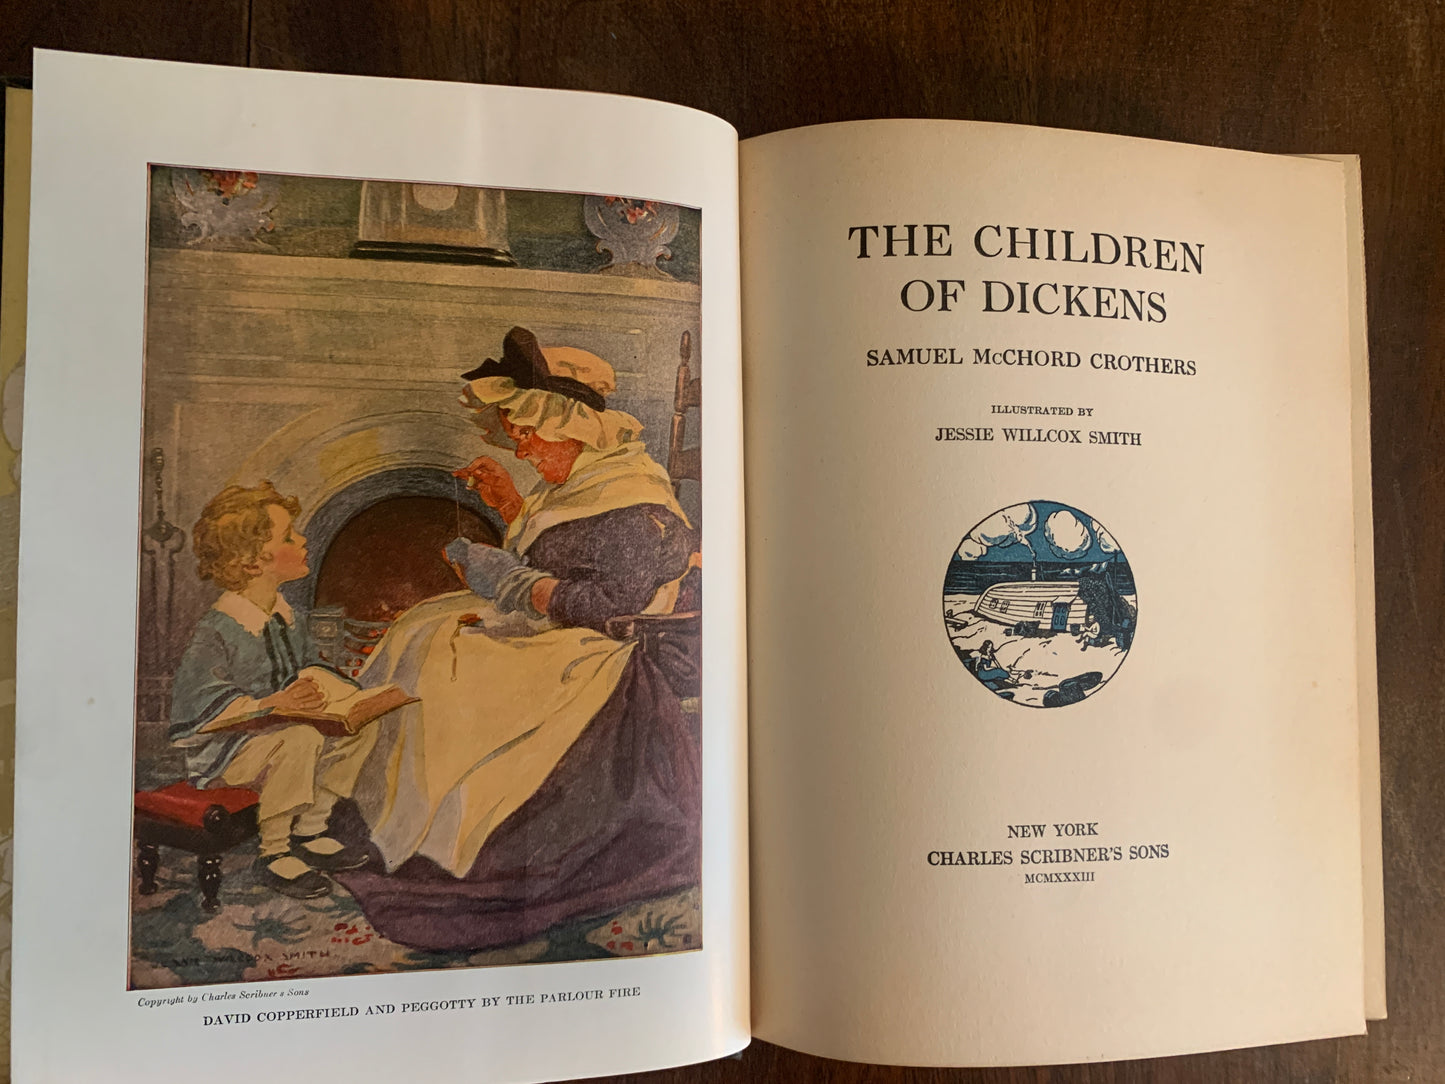 The Children of Dickens by Samuel McChord Crothers 1933